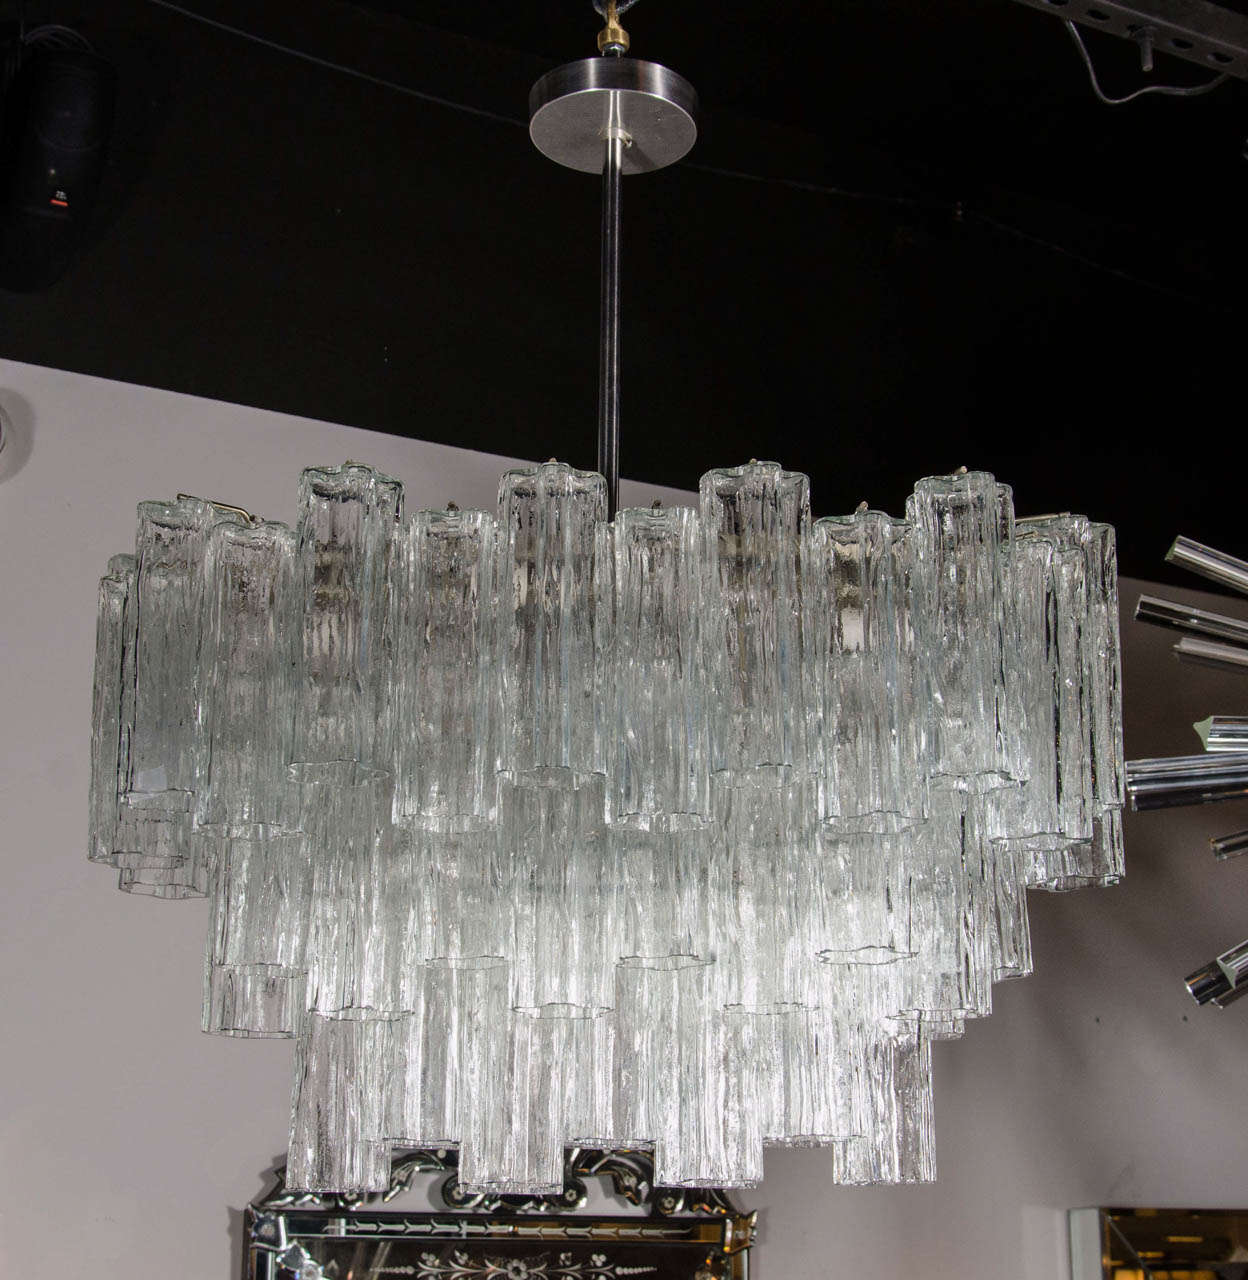 This gorgeous Mid-Century 'Tronchi' chandelier by Venini consists of numerous tubular Murano glass shades hung over three tiers at alternating heights giving a cascading effect. The tubular shades are textured and clear and look star shaped when